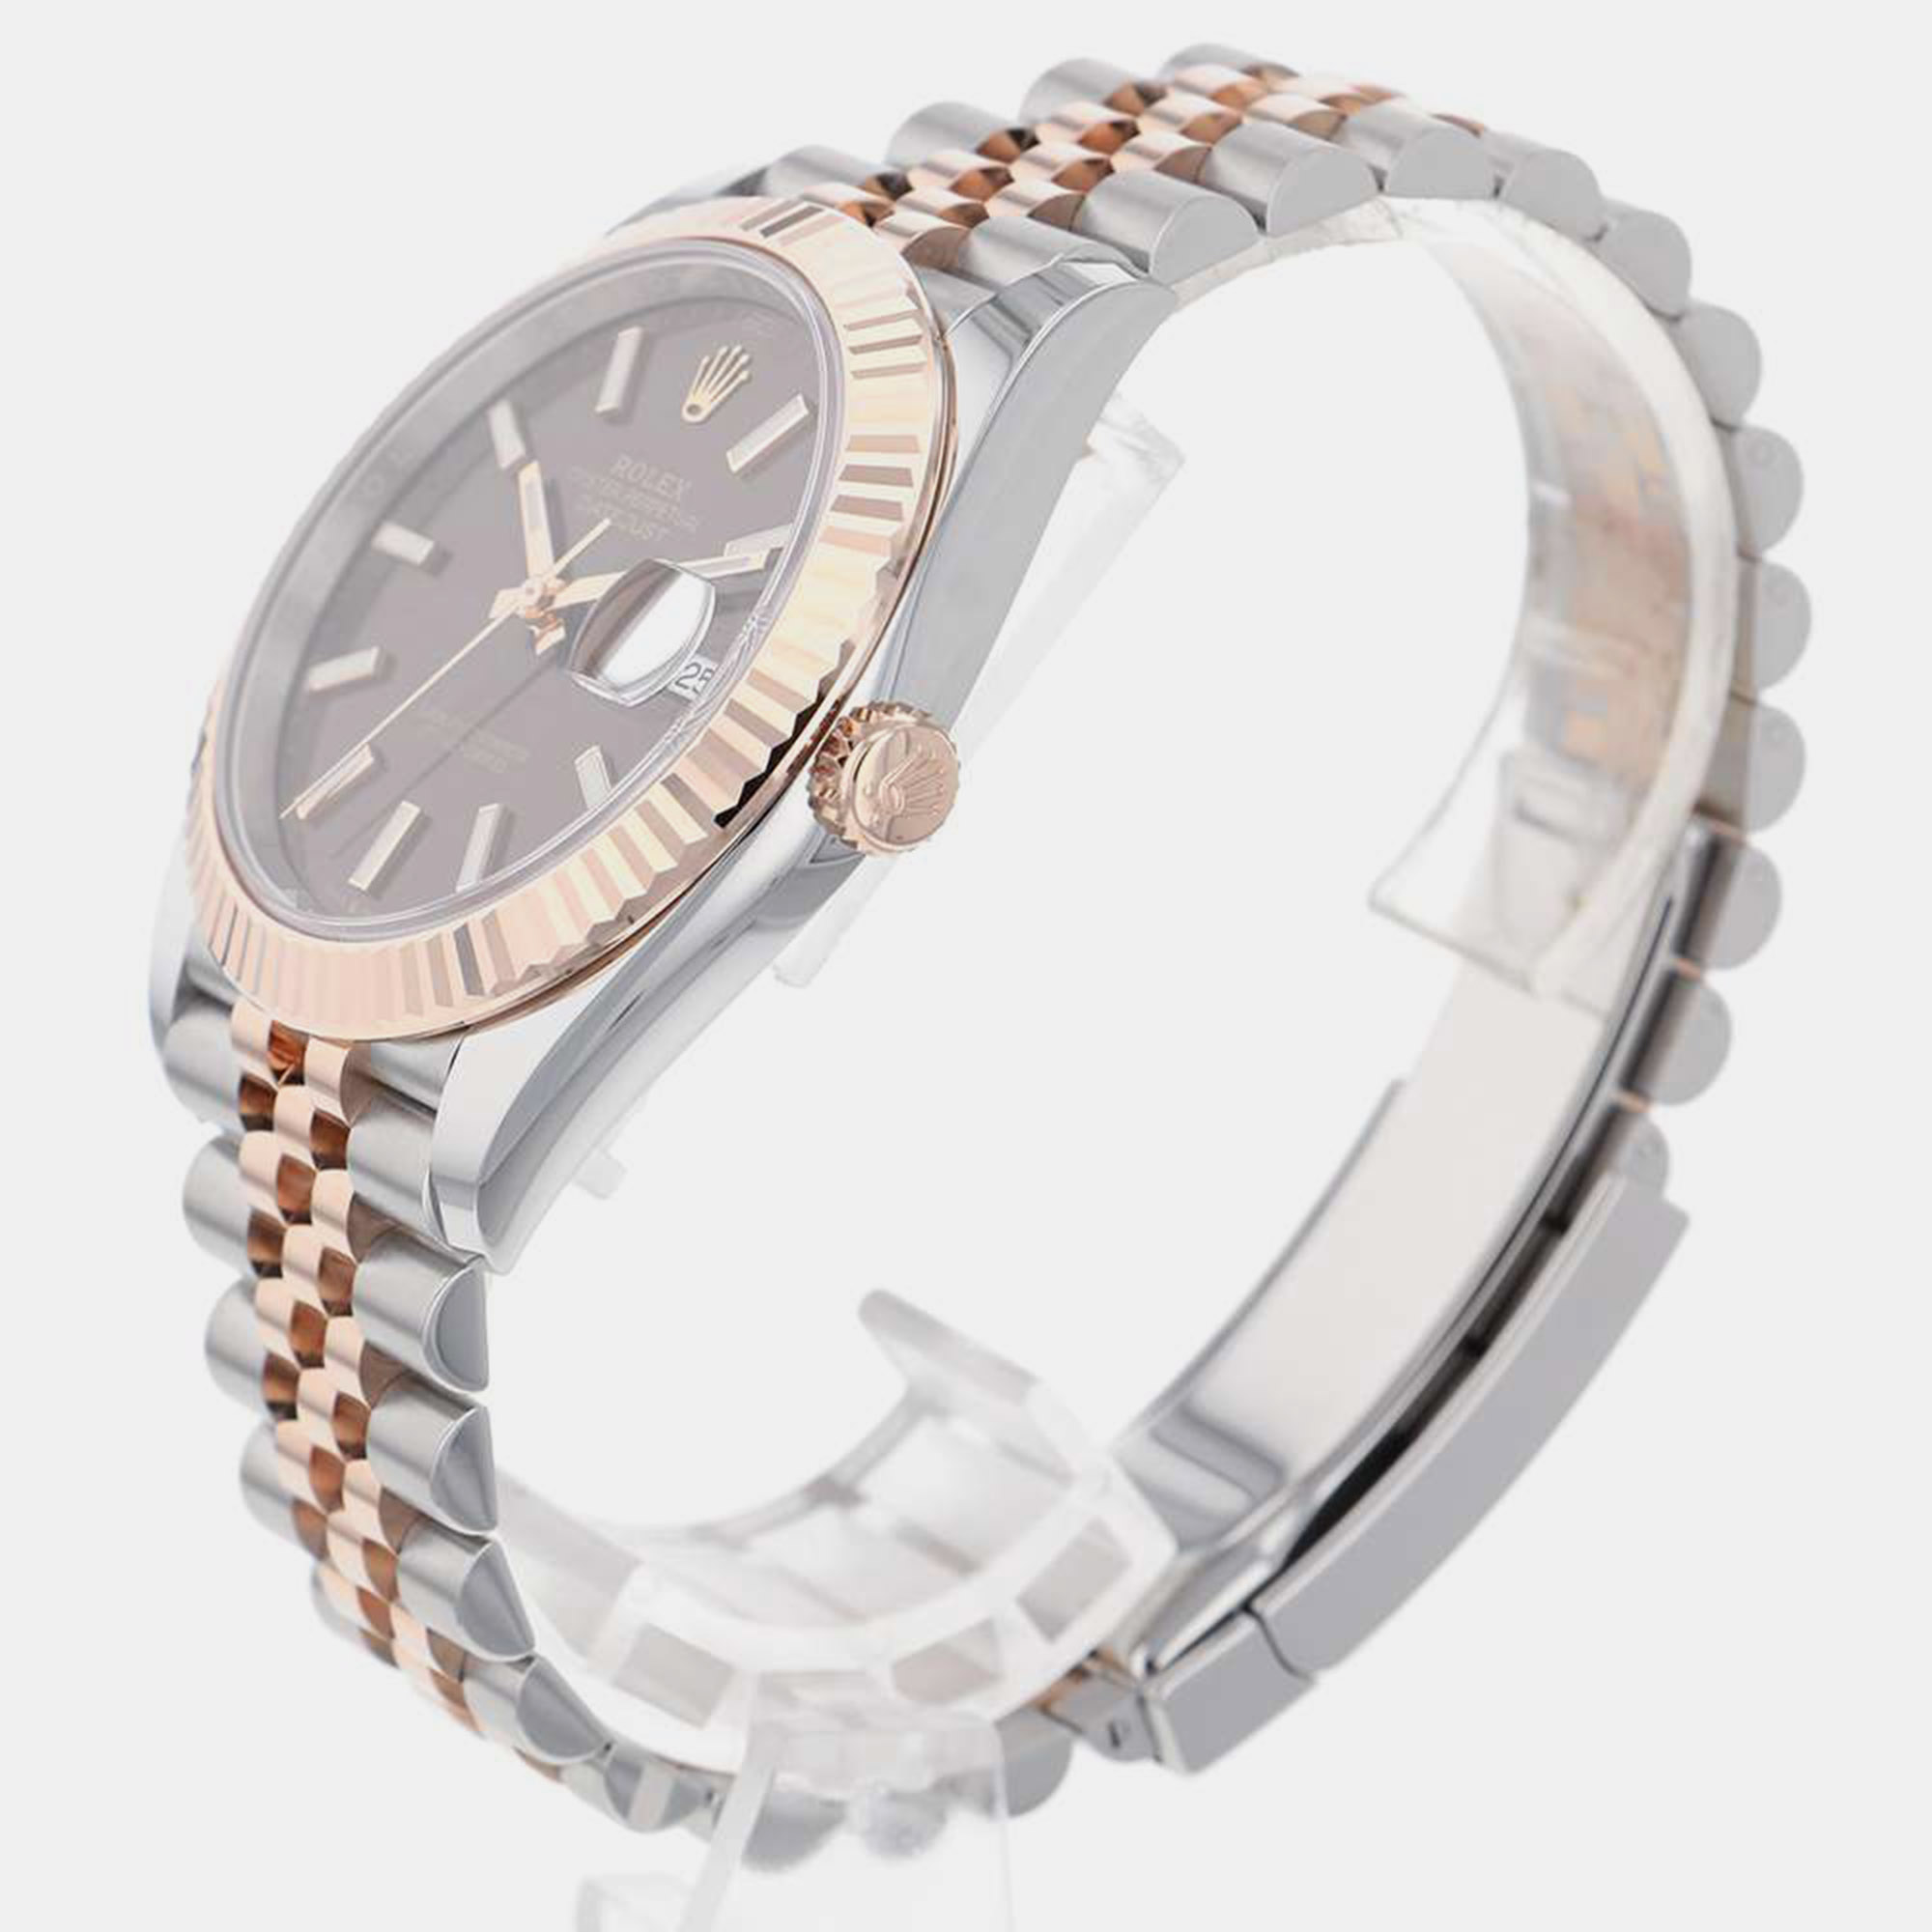 

Rolex Brown 18k Rose Gold And Stainless Steel Datejust 126331 Automatic Men's Wristwatch 41 mm